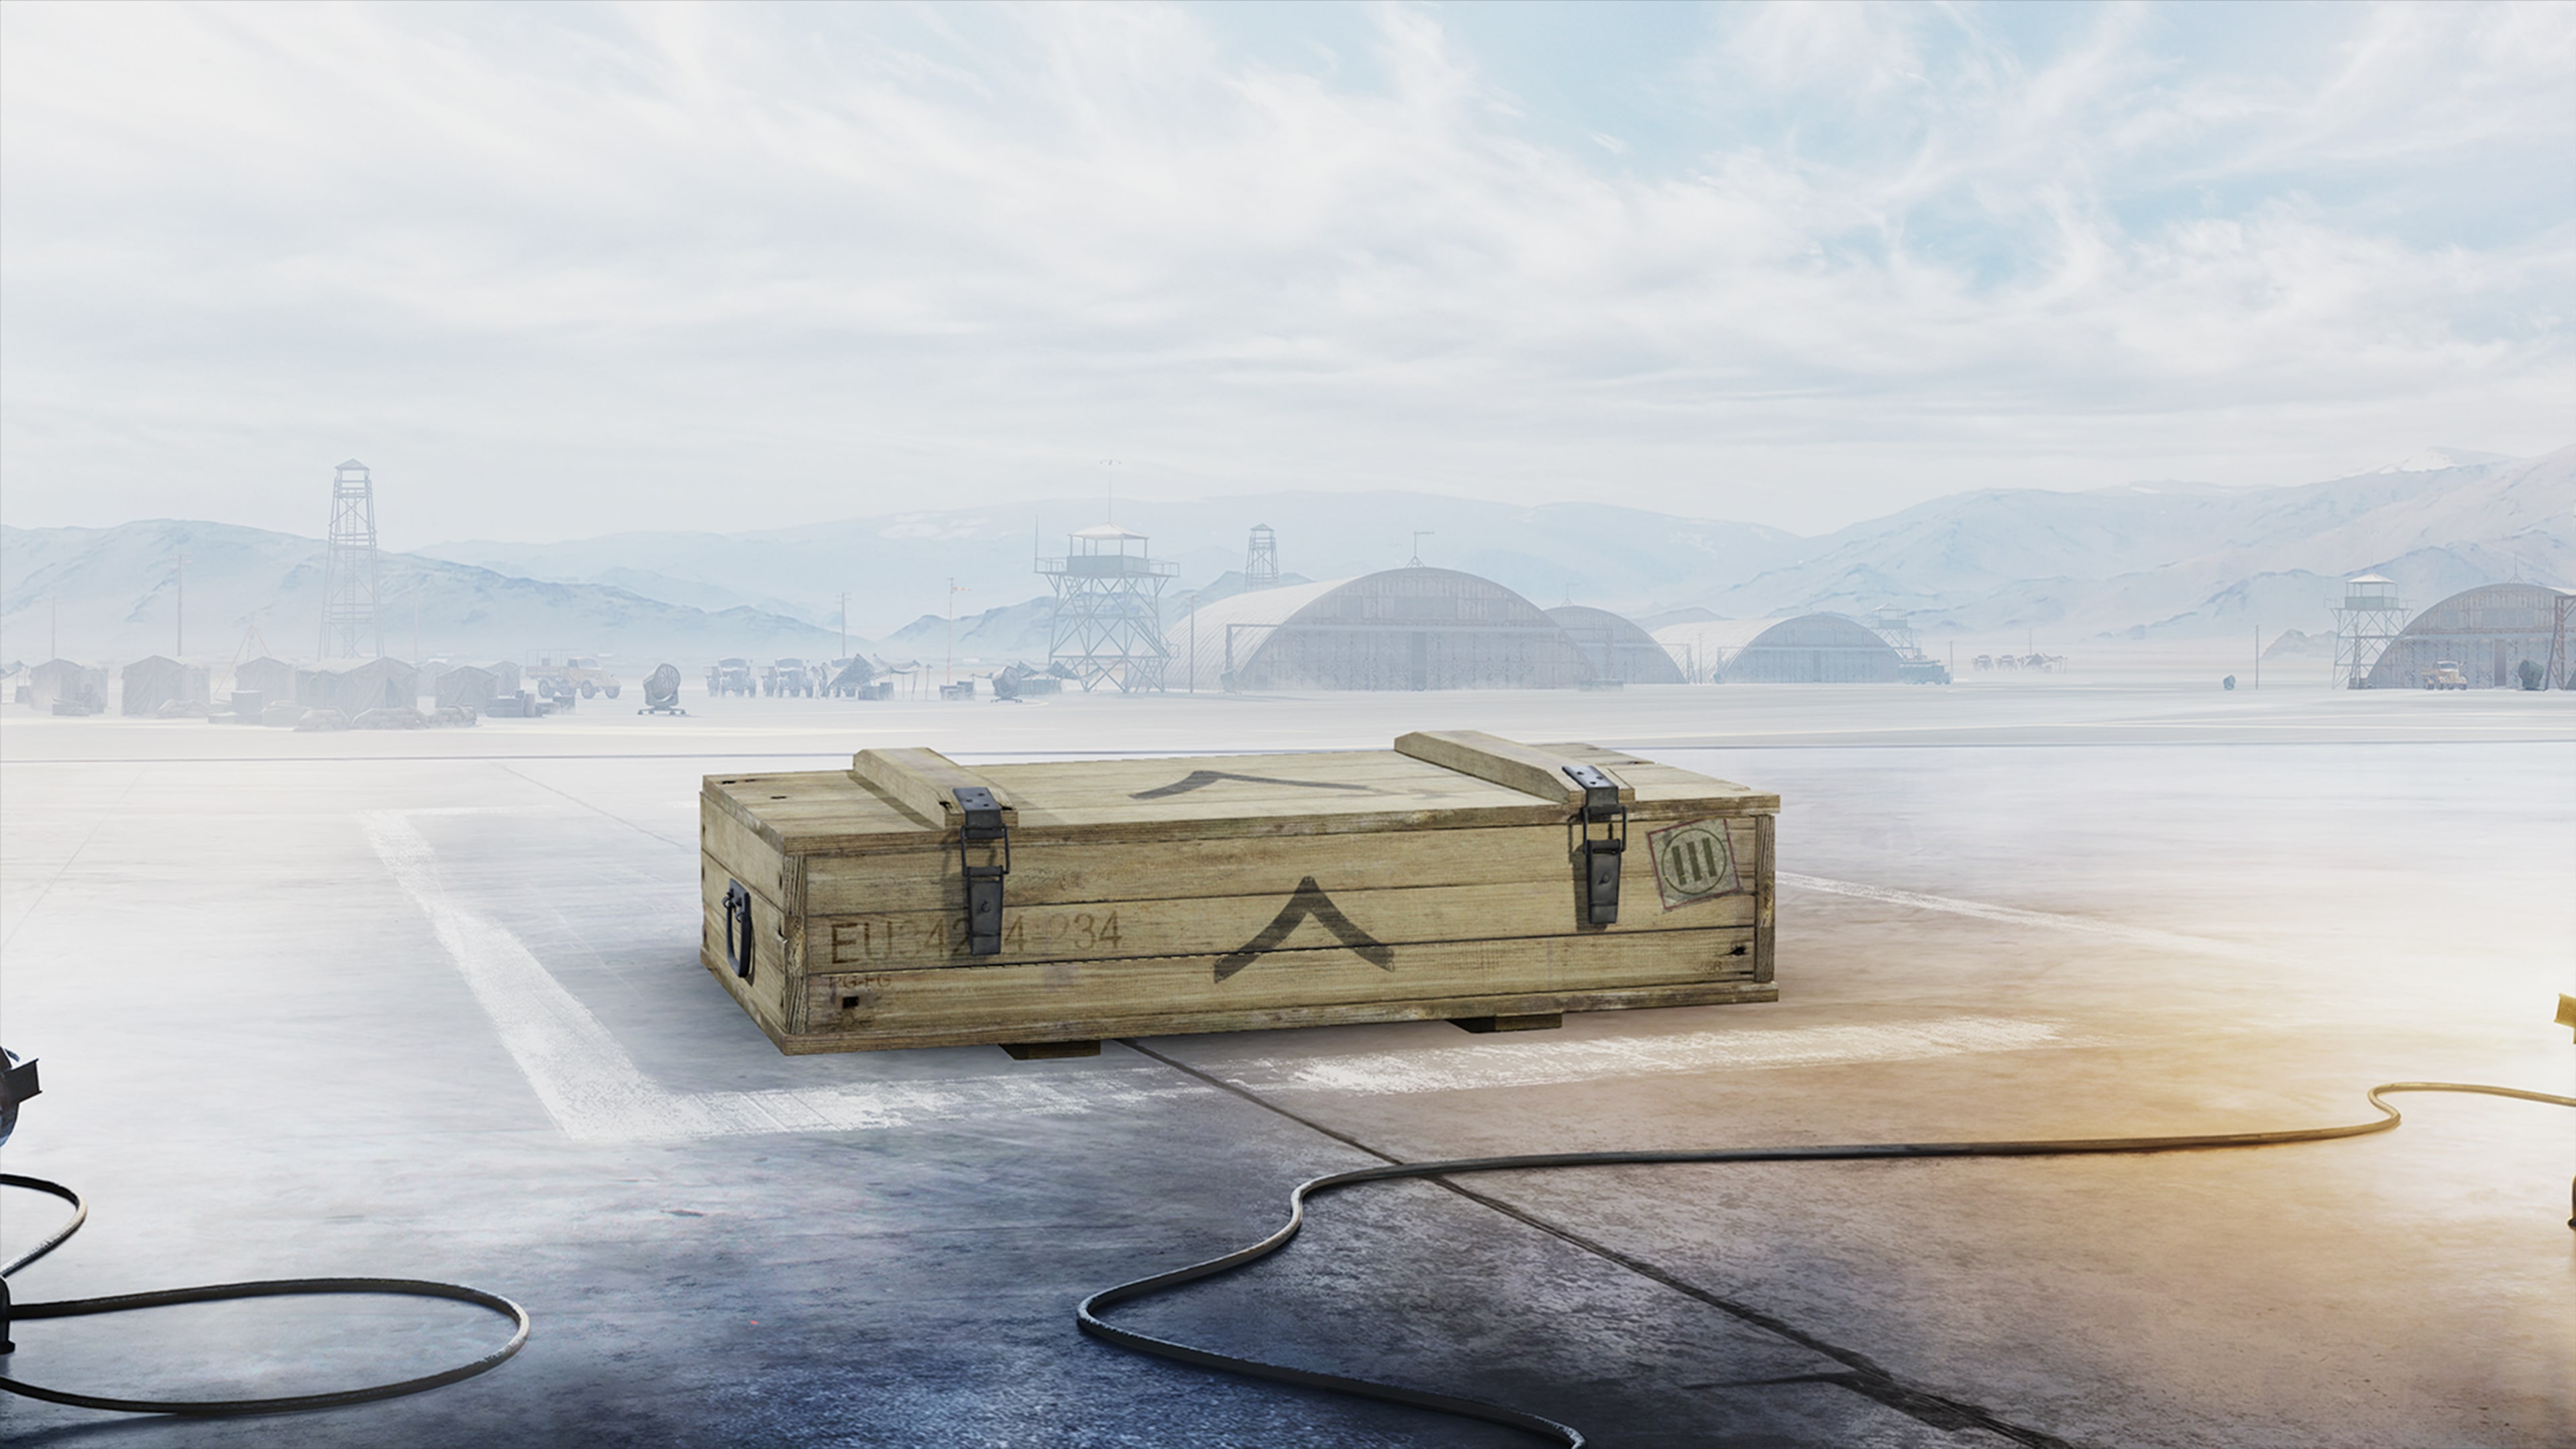 World of Tanks - 11 Private War Chests